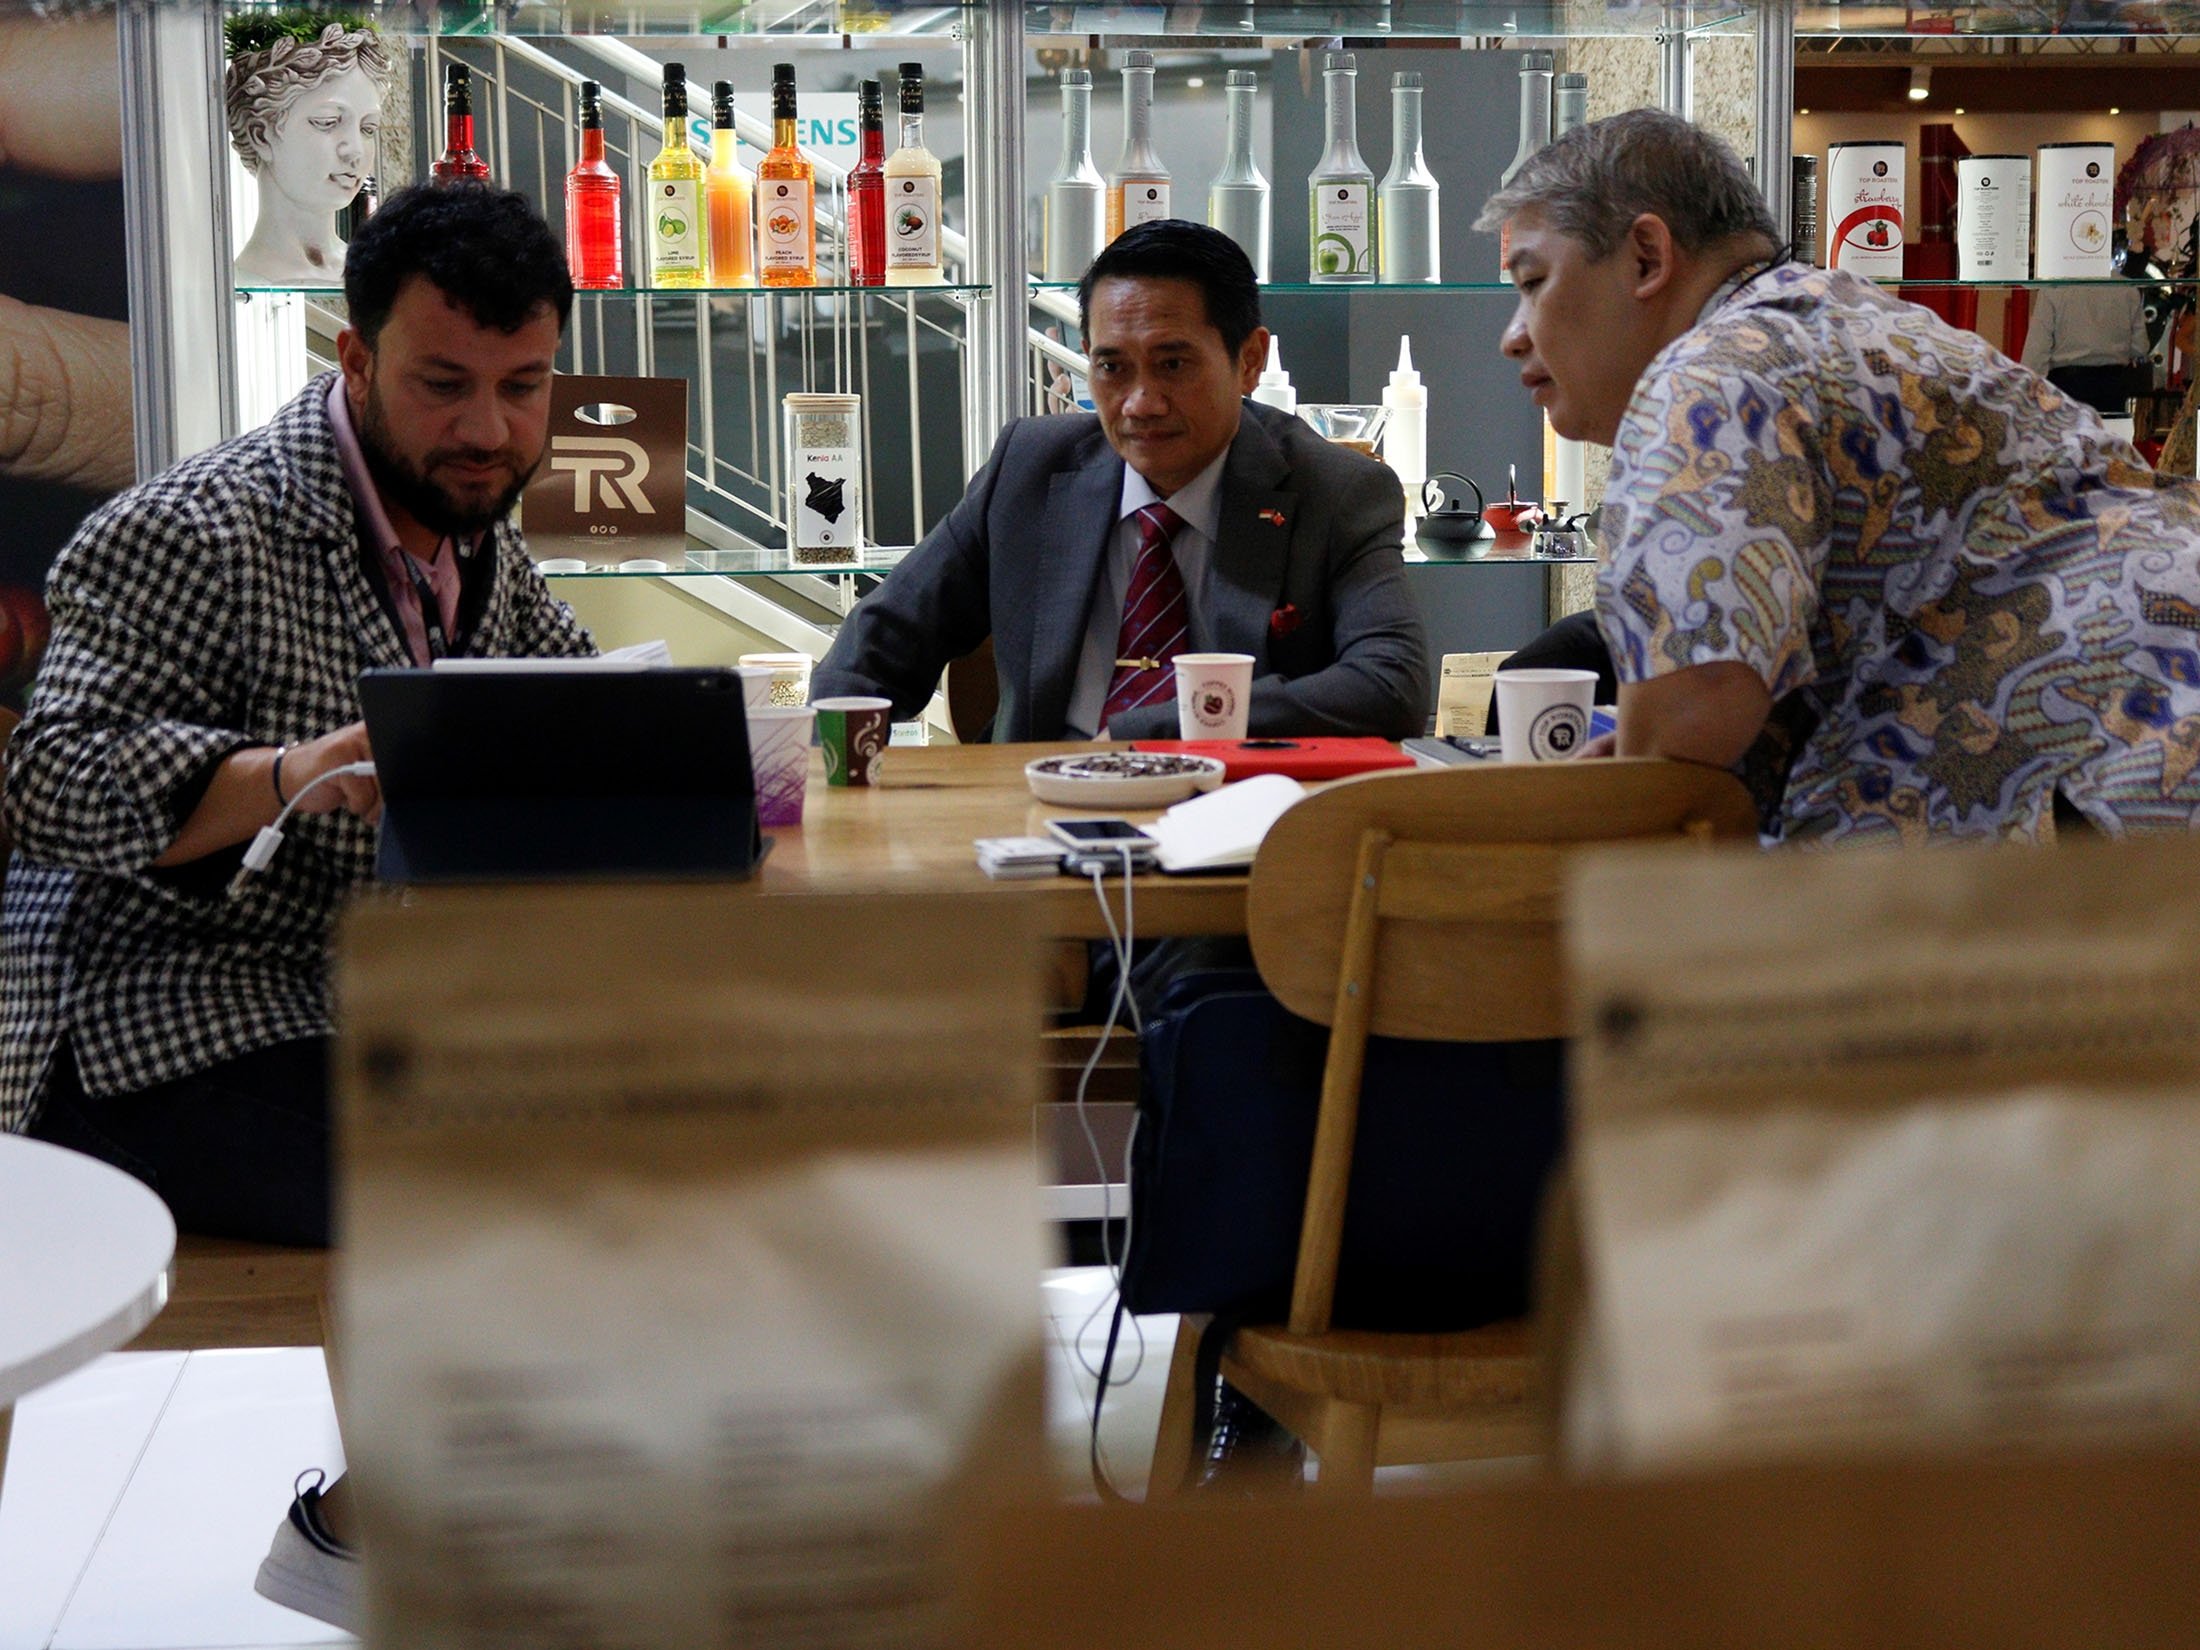 People visit Coffex Istanbul, an expo devoted entirely to coffee. (Photo courtesy of Leyla Yvonne Ergil)